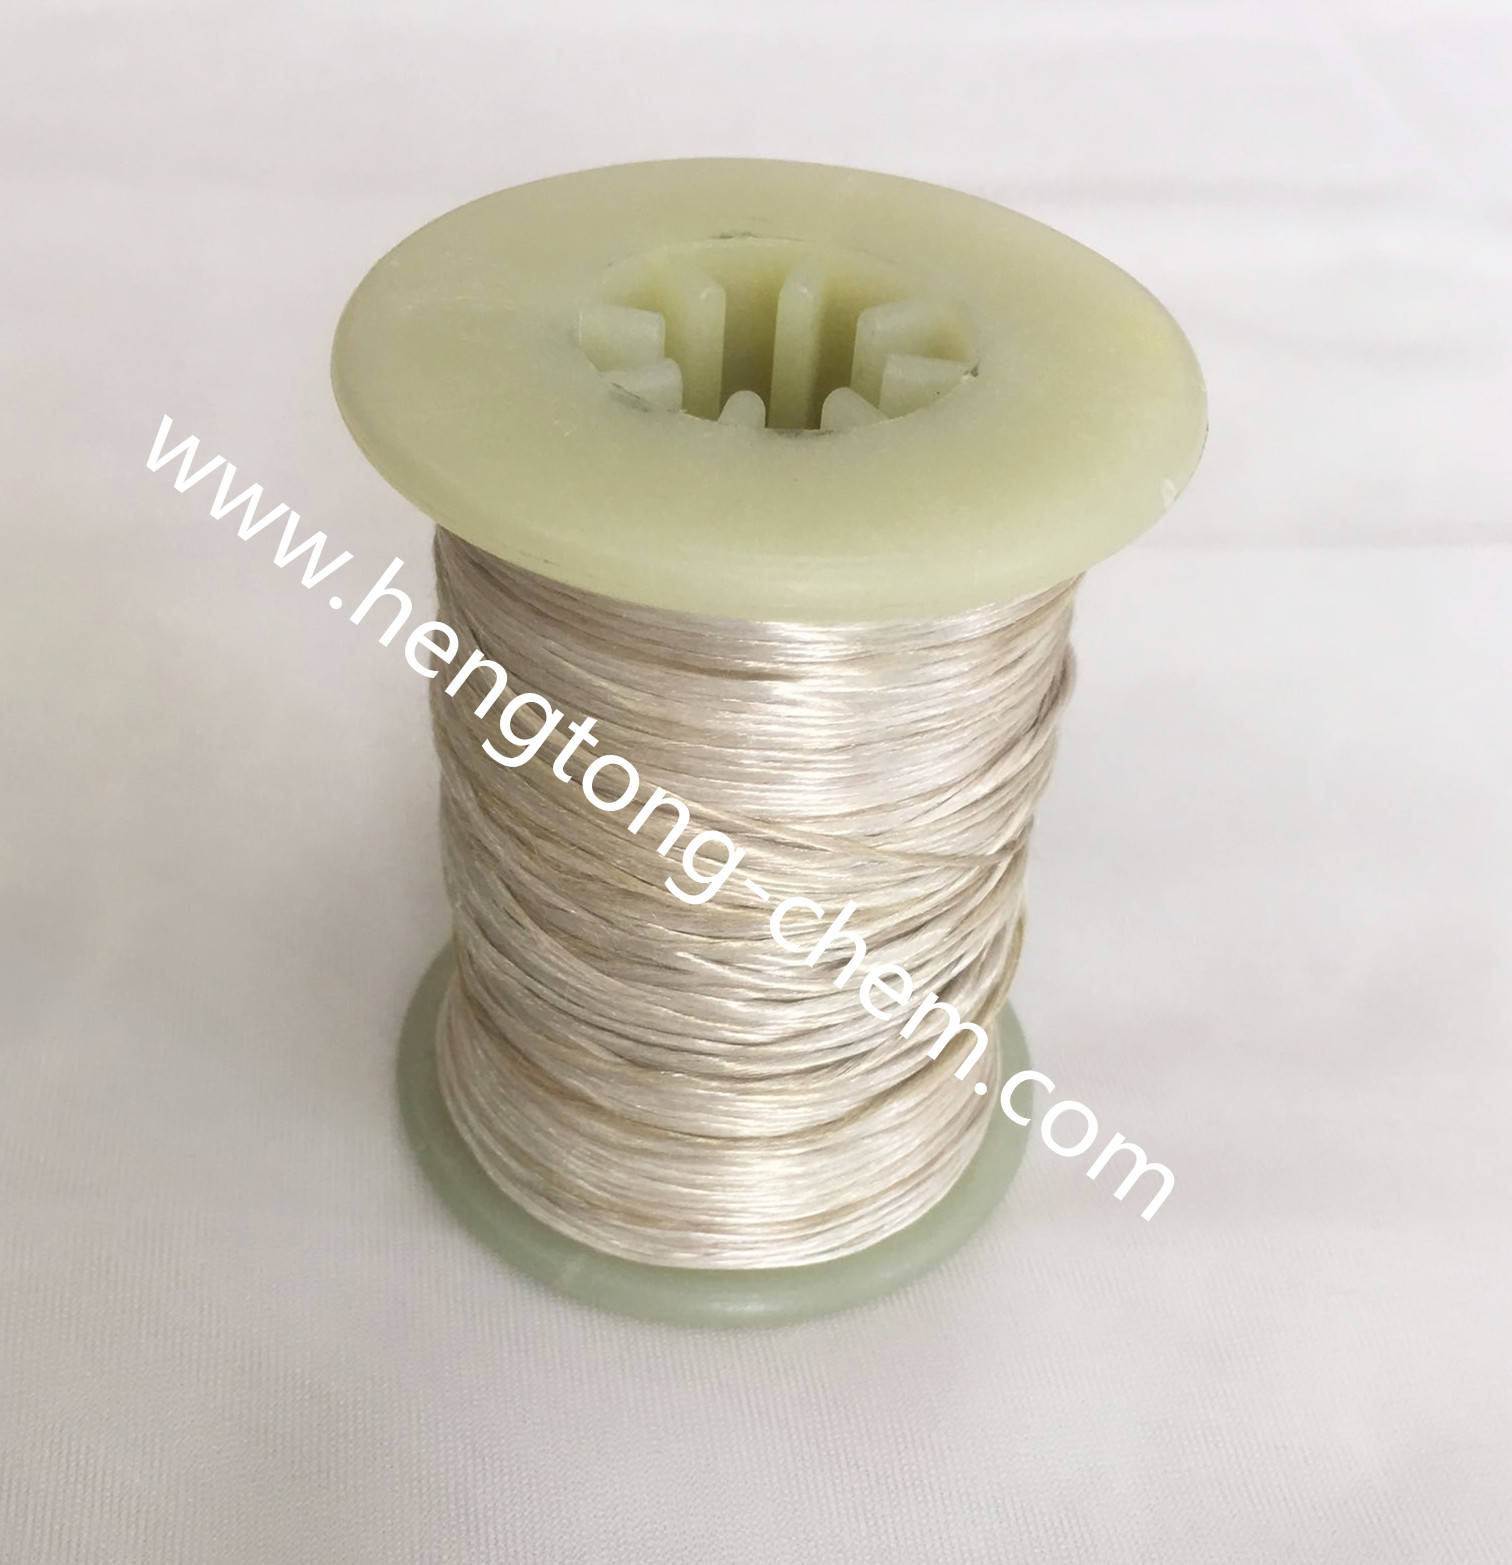 High-pass rate lightweight cable signal input wire, Kevlar silver plated (aramid silver plated) 1500